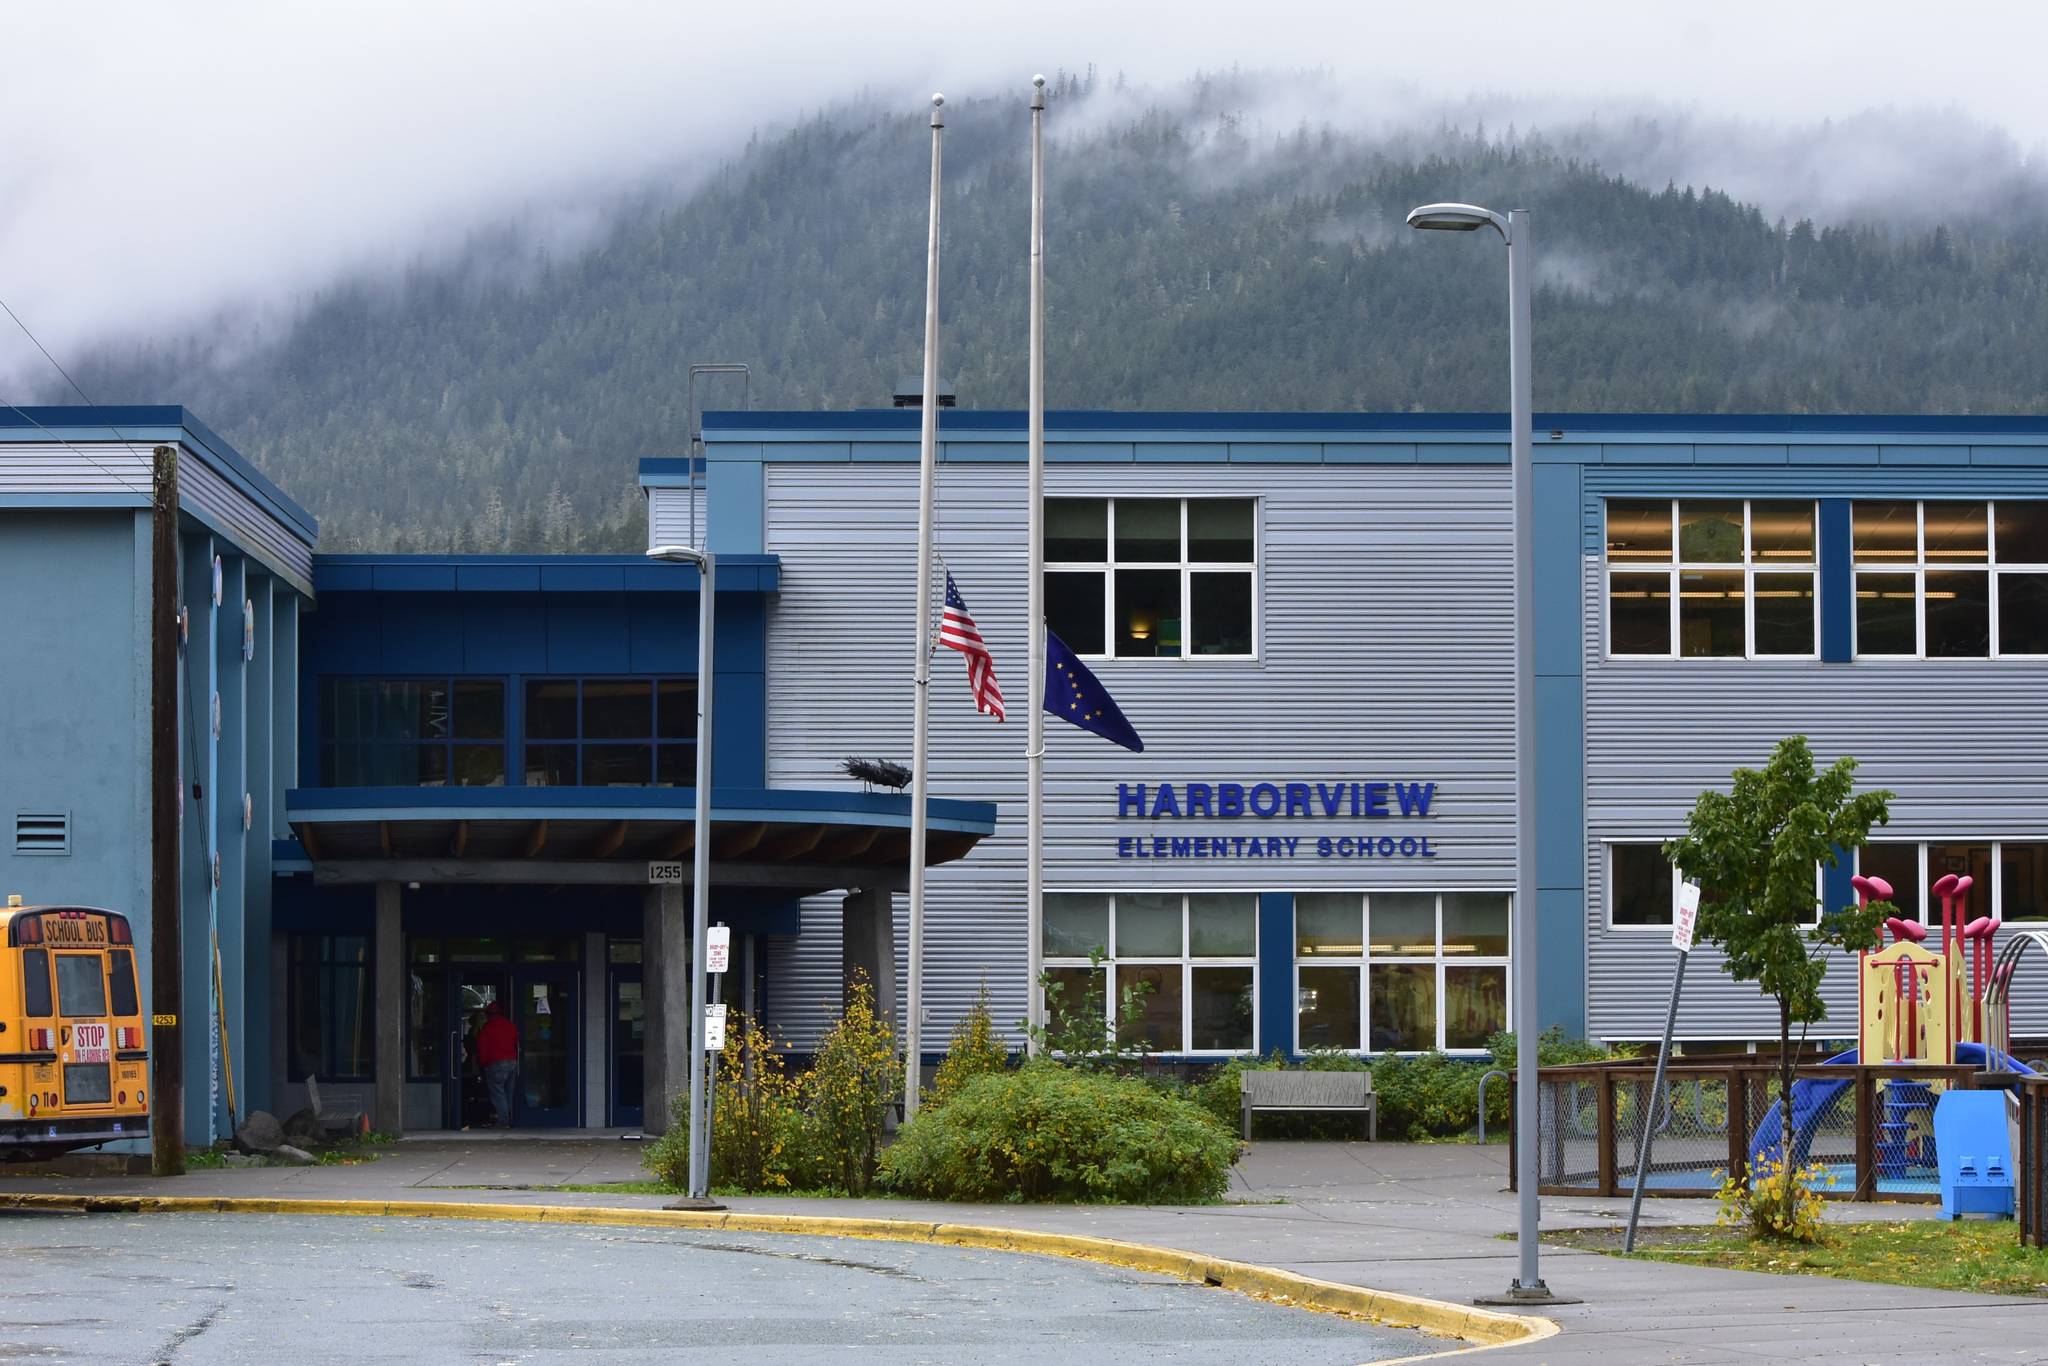 The Juneau School District was able to lower the price of its child care program after receiving a $600,000 boost in CARES Act money from the city. The program, held at Harborview, Glacier Valley and Riverbend Elementary Schools, has to limit the number of students to allow for social distancing during the COVID-19 pandemic. Monday, Sept. 28, 2020. (Peter Segall / Juneau Empire)